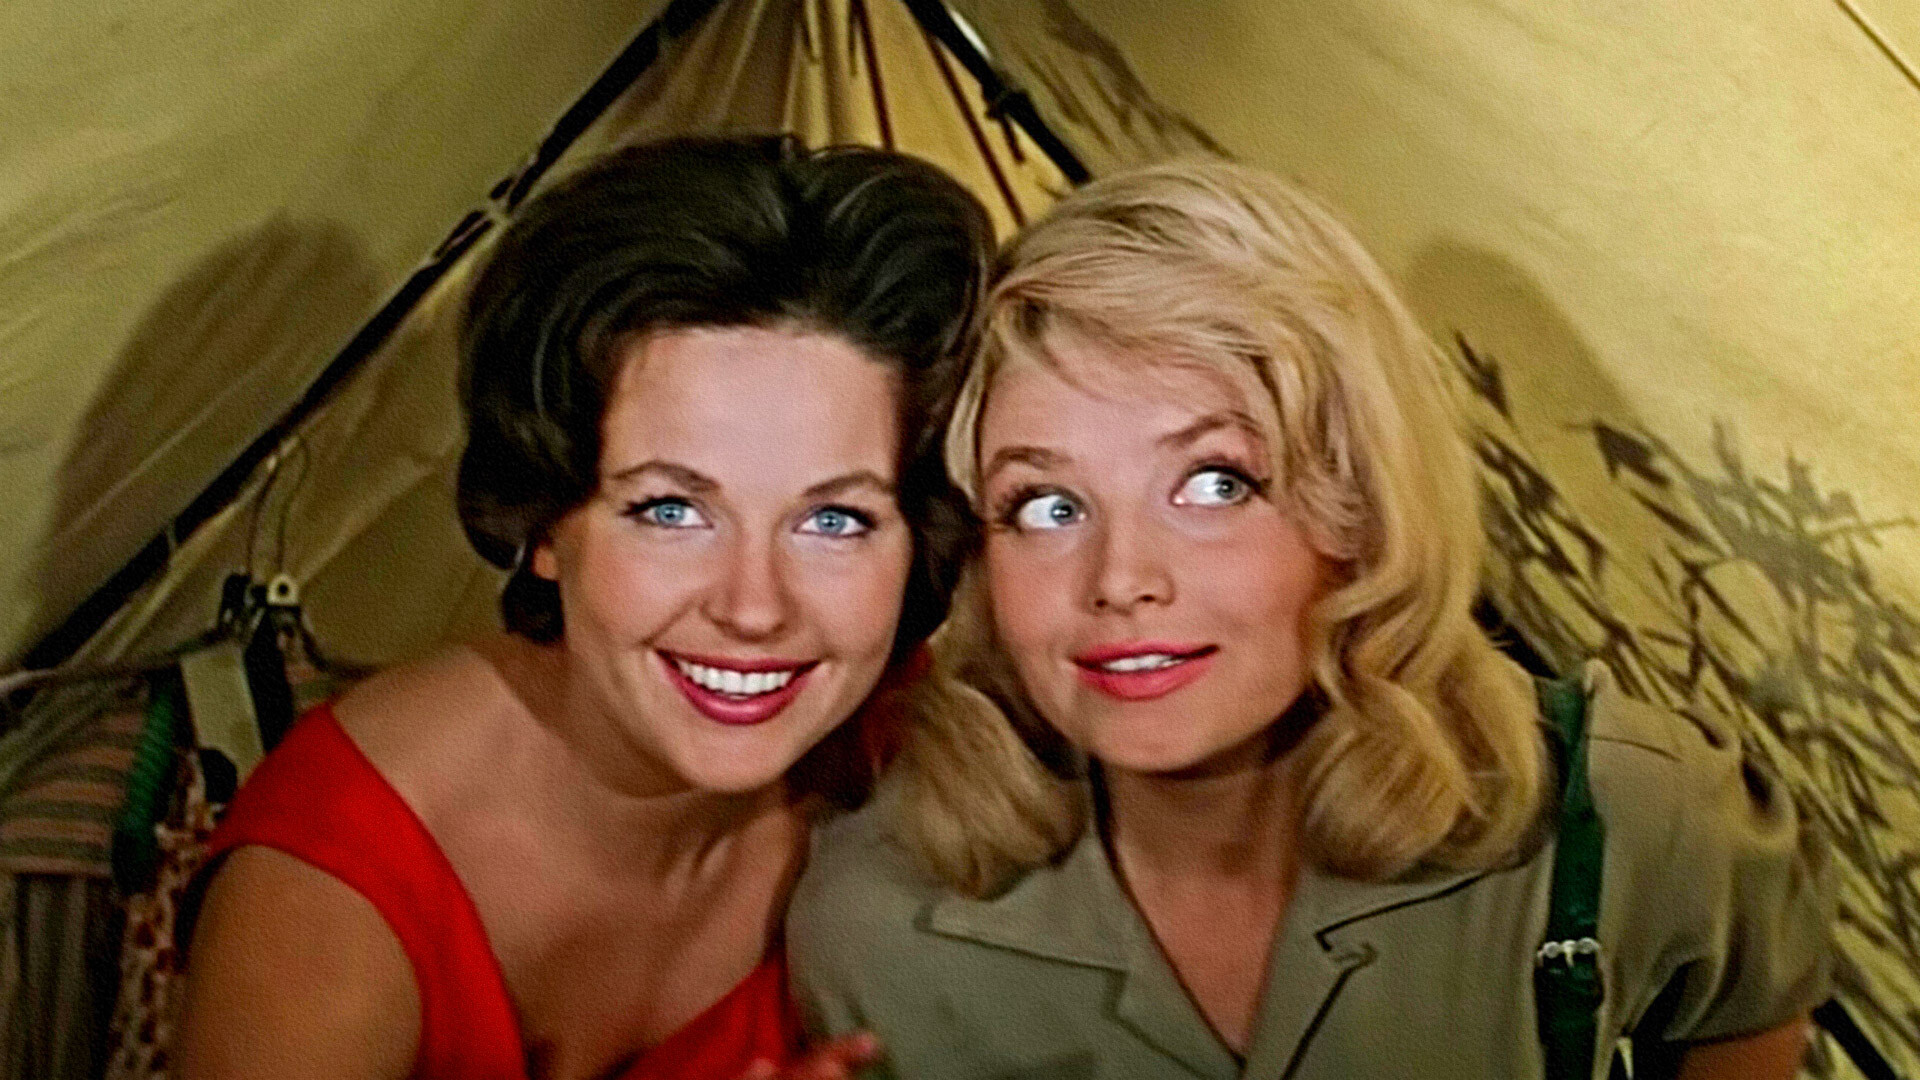 A scene from the 3+2 movie about summer holidays. According to the plot, one of the ladies (left) is a wild animal trainer, and her friend (right) is an actress. 